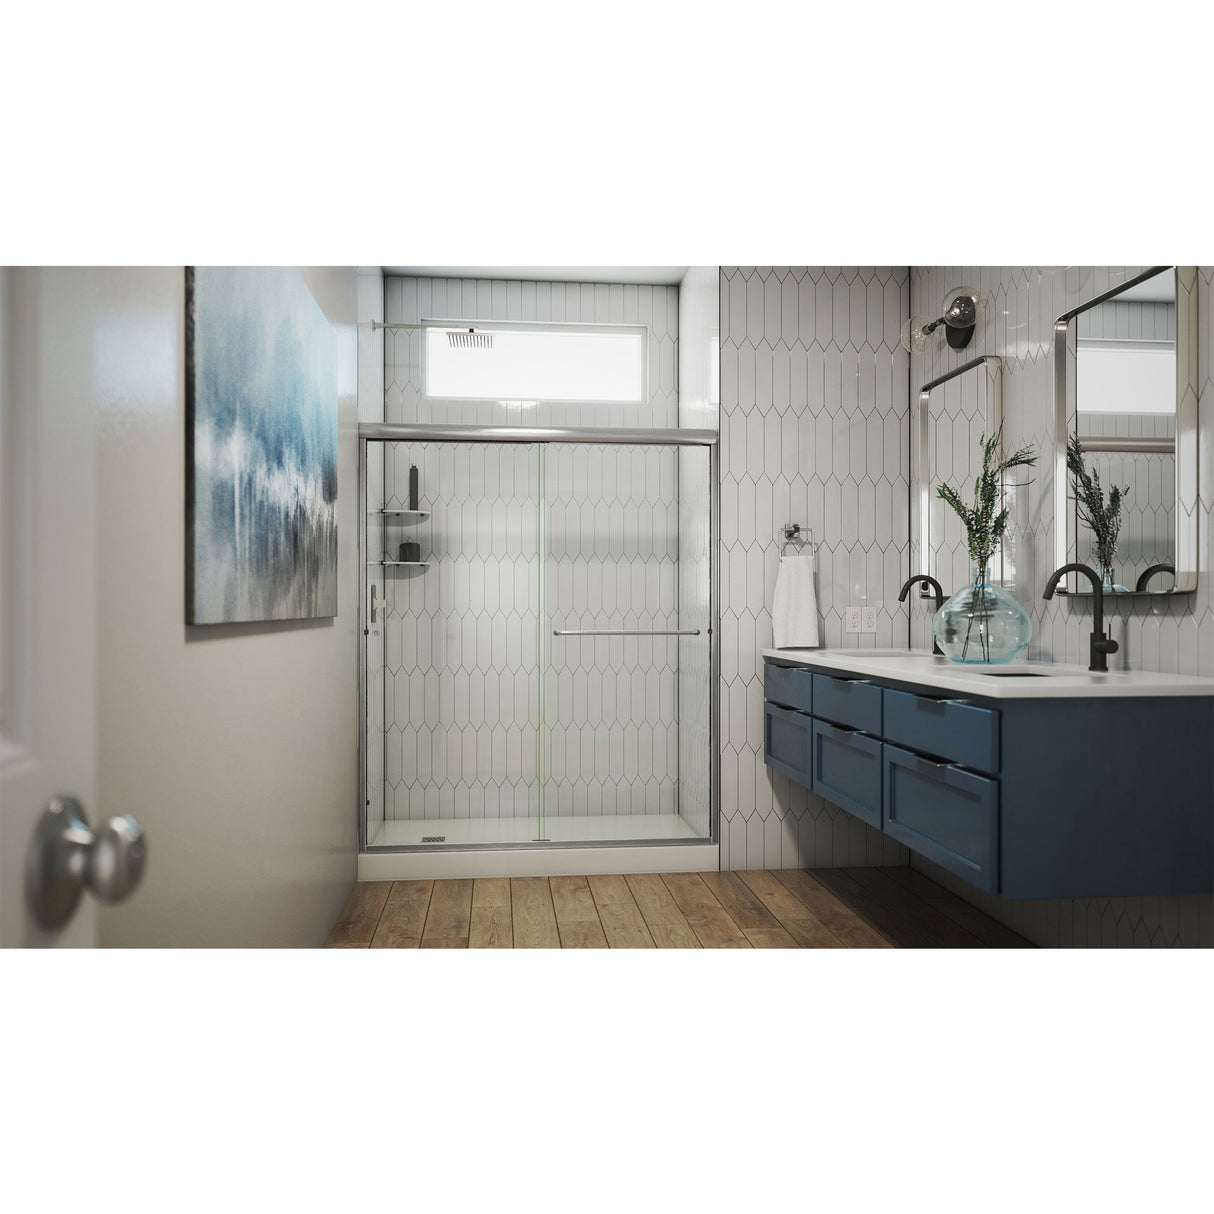 DreamLine Alliance Pro 56-60 in. W x 76 3/8 in. H Semi-Frameless Bypass Sliding Shower Door in Brushed Nickel and Clear Glass